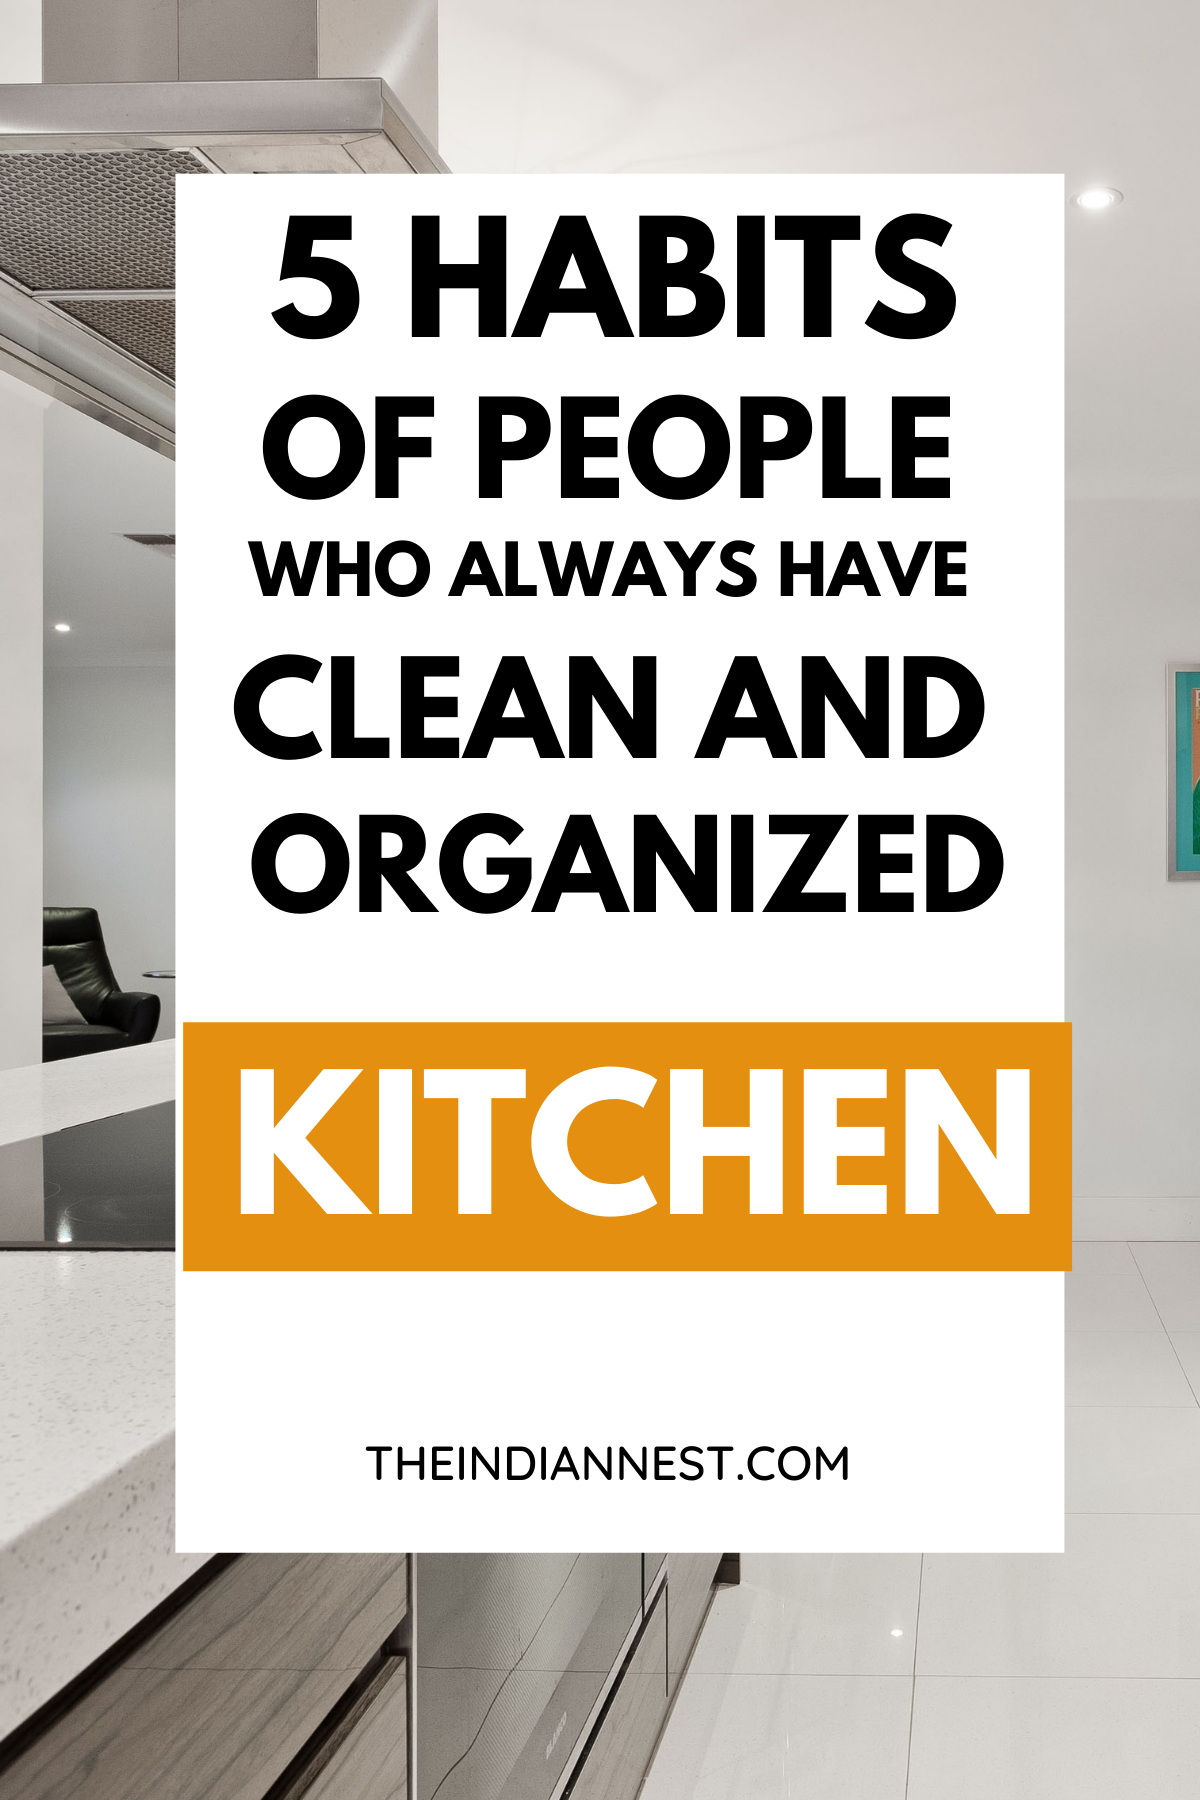 How do to keep your kitchen clean and organized? habits to keep your kitchen organized and clutter-free. Simple habits to keep your kitchen organized and clutter-free. So you can get organized now, and keep it that way moving forward!